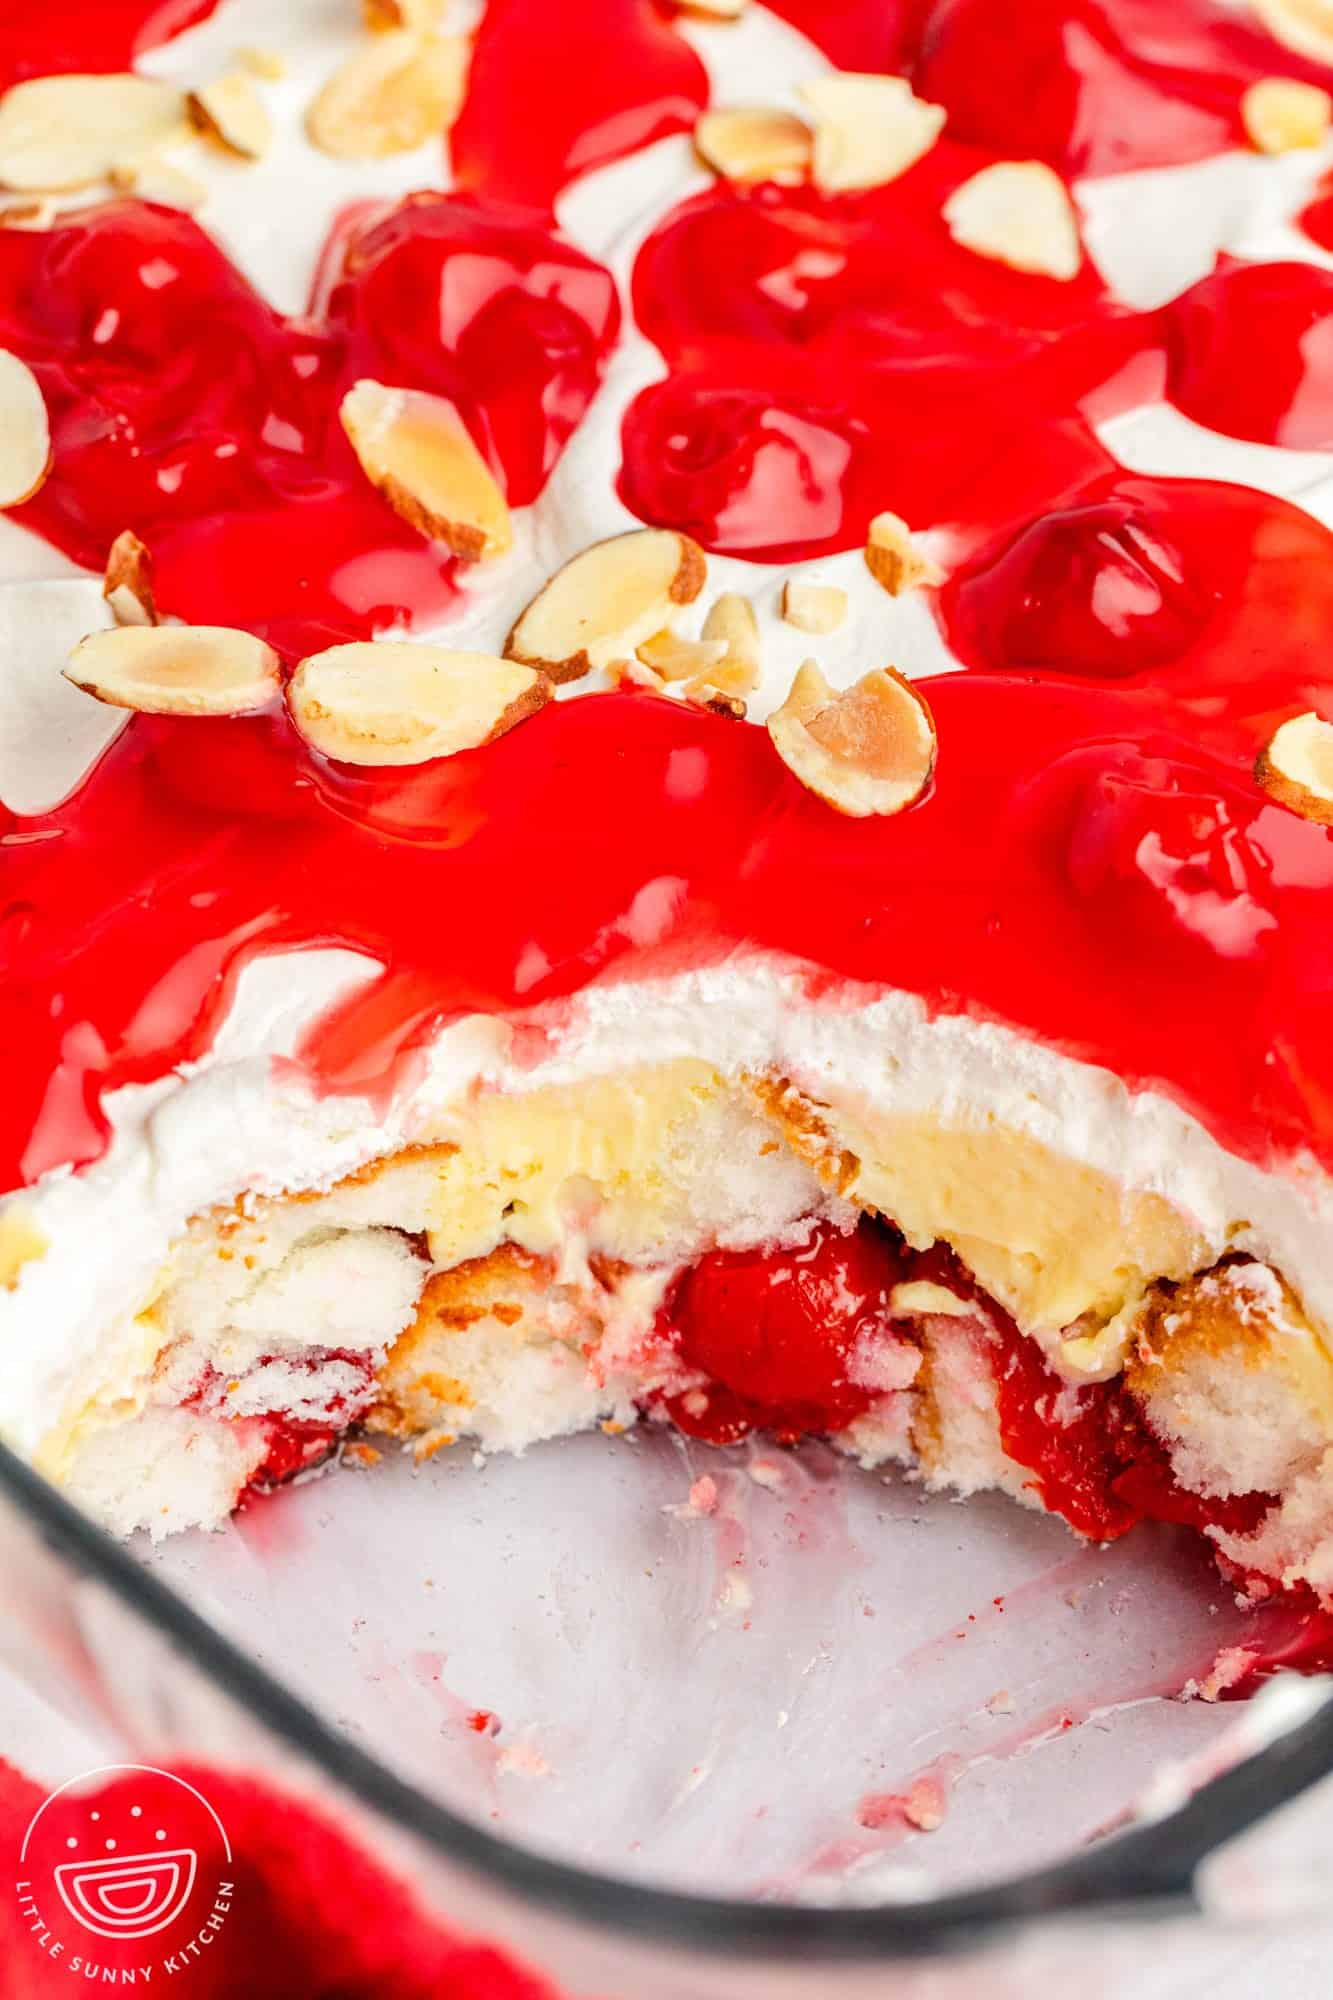 heaven on earth cake topped with cherry pie filling and slivered almonds, in a glass pan. A serving has been removed from the front corner to show the texture inside.